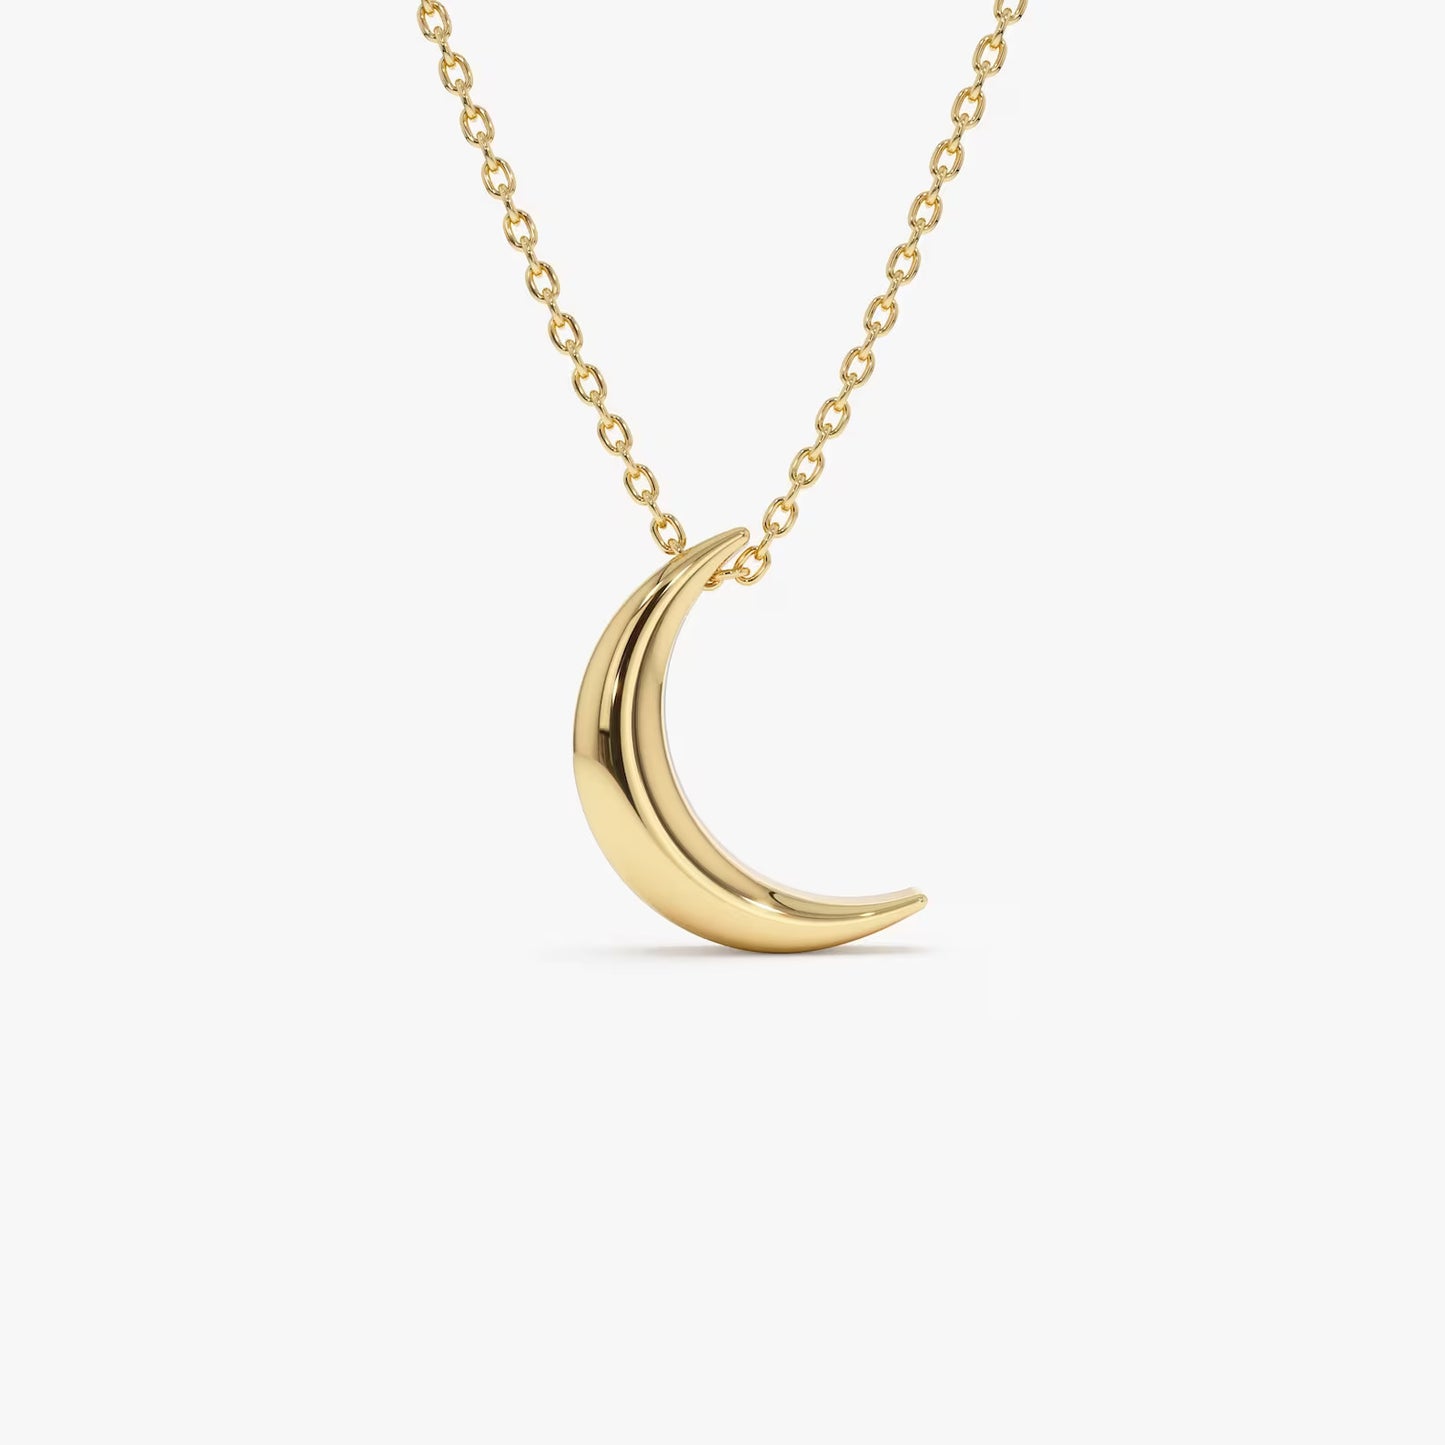 18 Carat Gold Crescent Shaped Necklace - Burst of Arabia - Illuminate Your Style with Exquisite Arabic Jewelry.